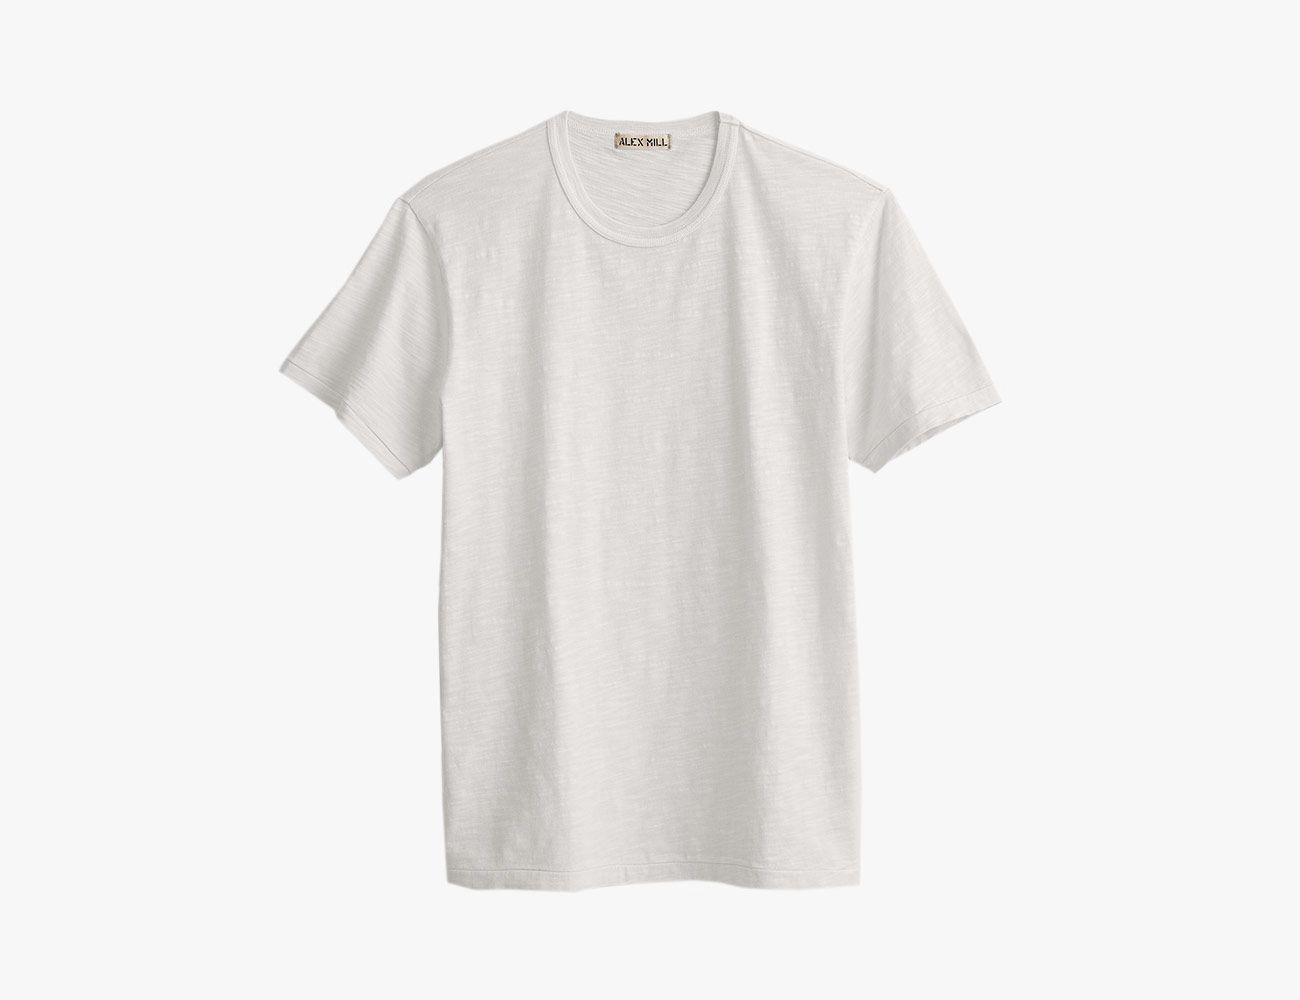 Everyone Should Own a Solid White T-Shirt